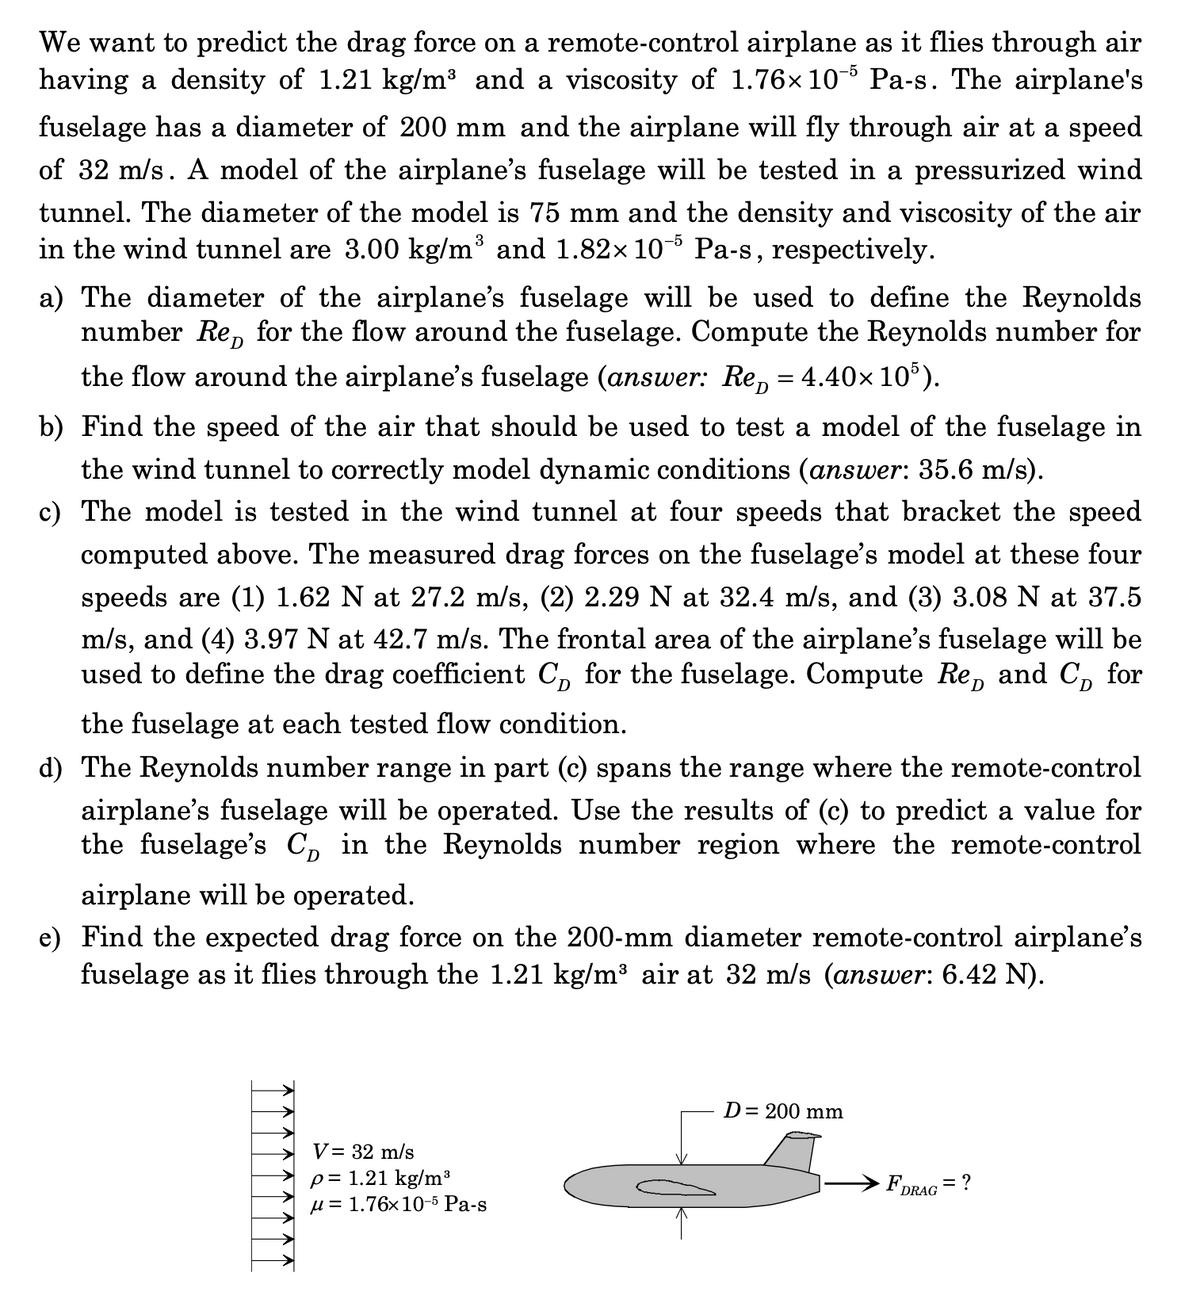 We want to predict the drag force on a remote-control airplane as it flies through air
having a density of 1.21 kg/m³ and a viscosity of 1.76x10- Pa-s. The airplane's
fuselage has a diameter of 200 mm and the airplane will fly through air at a speed
of 32 m/s. A model of the airplane's fuselage will be tested in a pressurized wind
tunnel. The diameter of the model is 75 mm and the density and viscosity of the air
in the wind tunnel are 3.00 kg/m³ and 1.82× 10-5 Pa-s, respectively.
a) The diameter of the airplane's fuselage will be used to define the Reynolds
number Re, for the flow around the fuselage. Compute the Reynolds number for
the flow around the airplane's fuselage (answer: Re, = 4.40x 10').
b) Find the speed of the air that should be used to test a model of the fuselage in
the wind tunnel to correctly model dynamic conditions (answer: 35.6 m/s).
c) The model is tested in the wind tunnel at four speeds that bracket the speed
computed above. The measured drag forces on the fuselage's model at these four
speeds are (1) 1.62 N at 27.2 m/s, (2) 2.29 N at 32.4 m/s, and (3) 3.08 N at 37.5
m/s, and (4) 3.97 N at 42.7 m/s. The frontal area of the airplane's fuselage will be
used to define the drag coefficient C, for the fuselage. Compute Re, and C, for
D
the fuselage at each tested flow condition.
d) The Reynolds number range in part (c) spans the range where the remote-control
airplane's fuselage will be operated. Use the results of (c) to predict a value for
the fuselage's C, in the Reynolds number region where the remote-control
airplane will be operated.
e) Find the expected drag force on the 200-mm diameter remote-control airplane's
fuselage as it flies through the 1.21 kg/m³ air at 32 m/s (answer: 6.42 N).
D= 200 mm
V= 32 m/s
p= 1.21 kg/m³
µ = 1.76×10-5 Pa-s
FDRAG = ?
